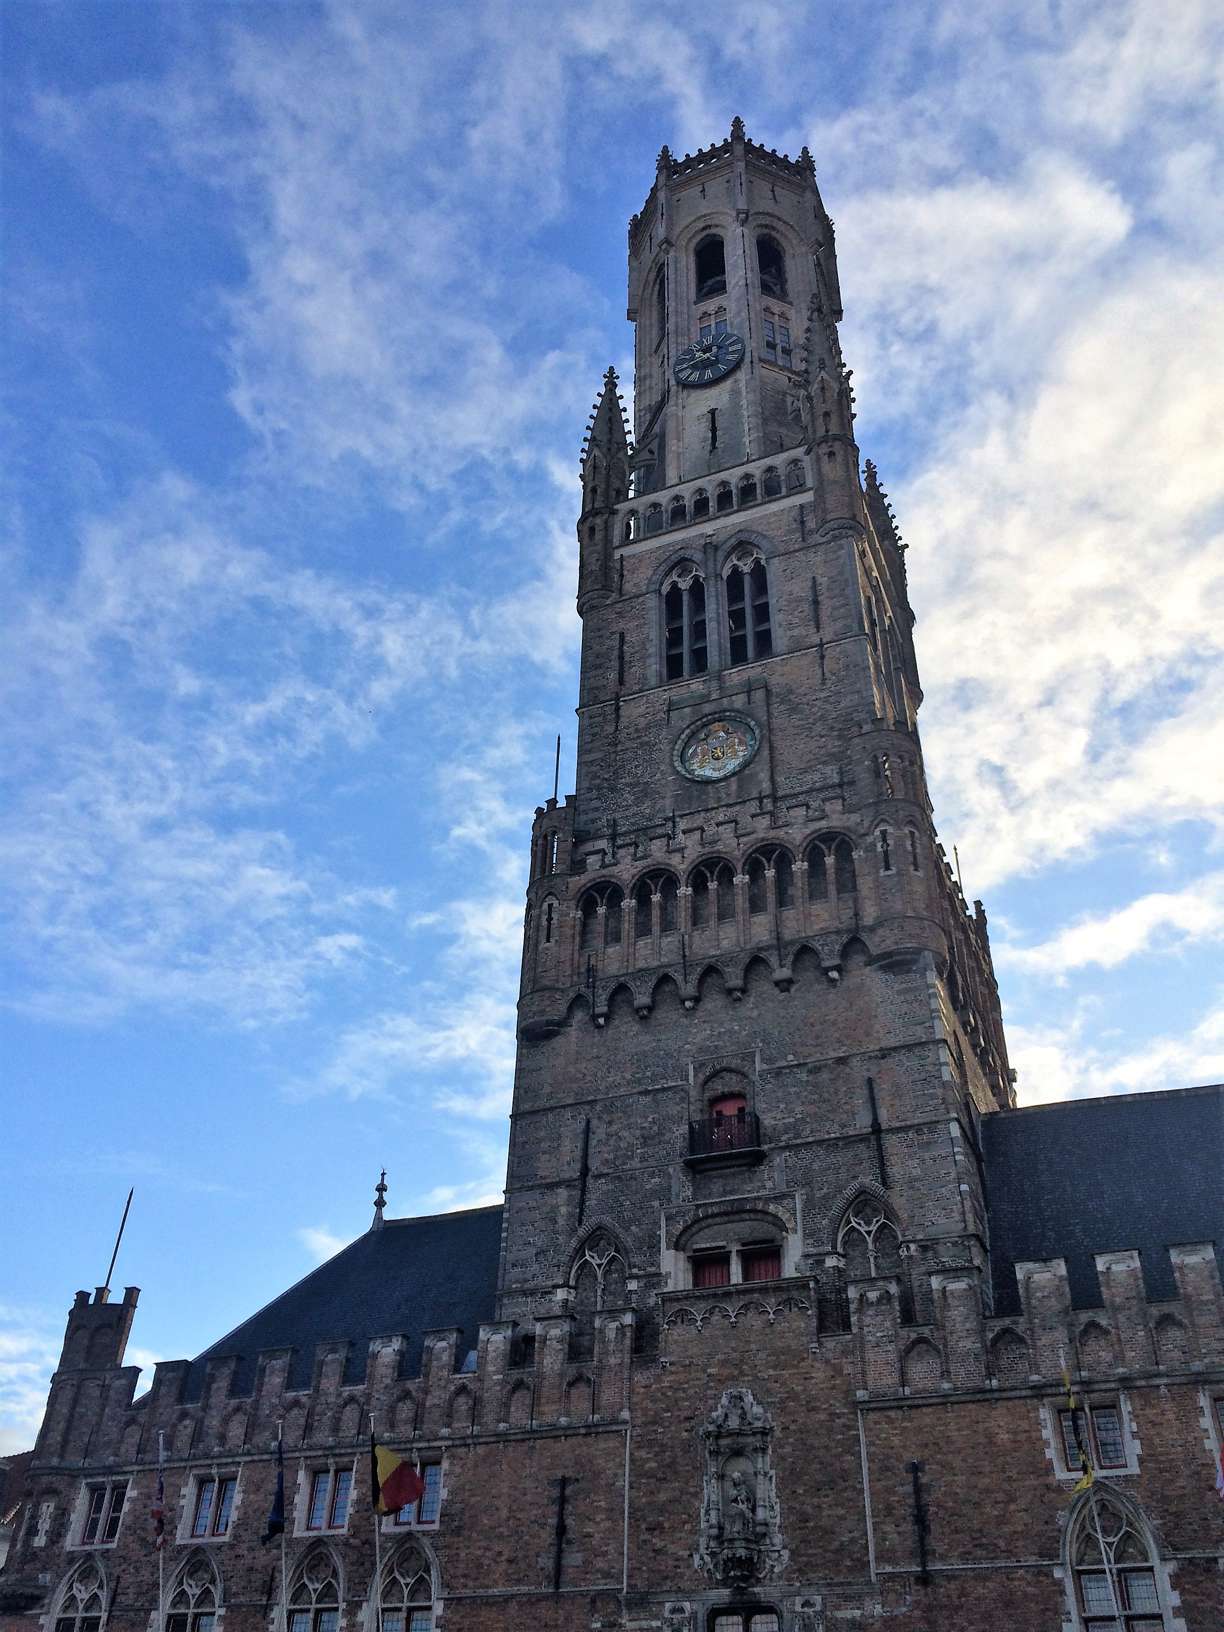 A picture of the belfry in Bruges, Belgium with a blue sky and some clouds in the background.